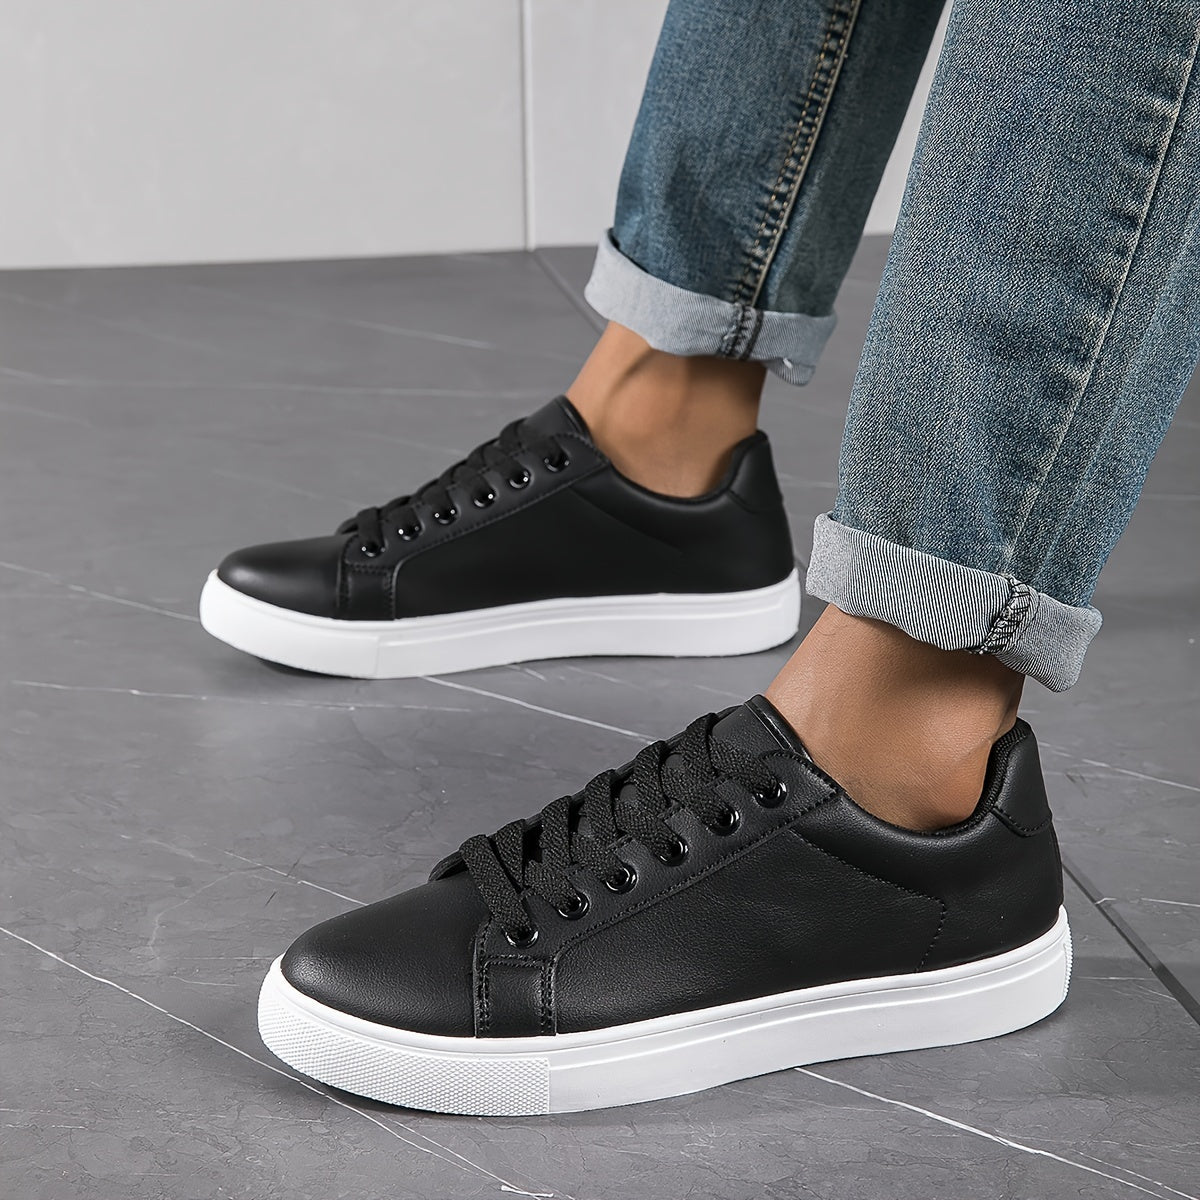 PLUS SIZE Solid Skate Shoes, Comfy Casual Sneakers